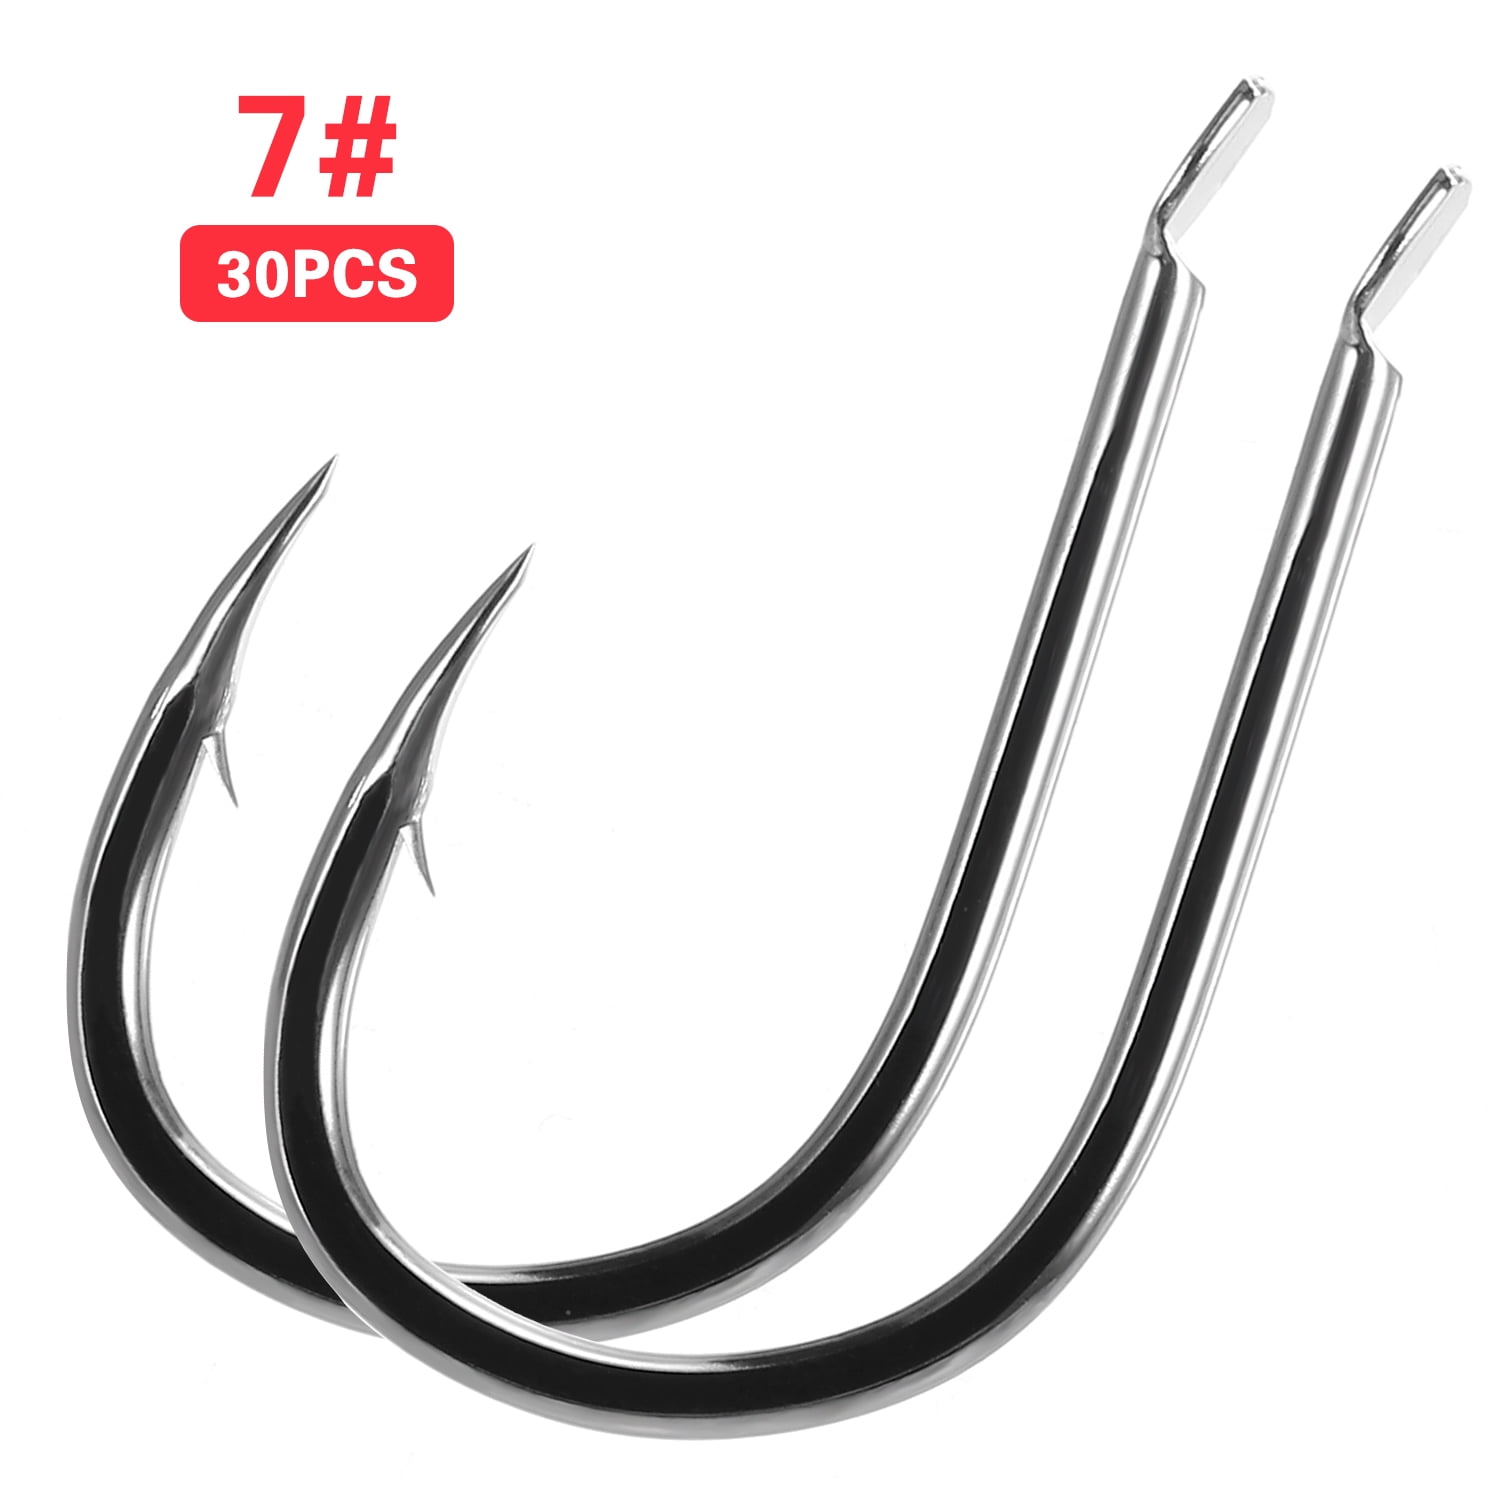 20pcs Sharped Forged Fishing Hooks High-carbon Steel Fish Hook HOT 